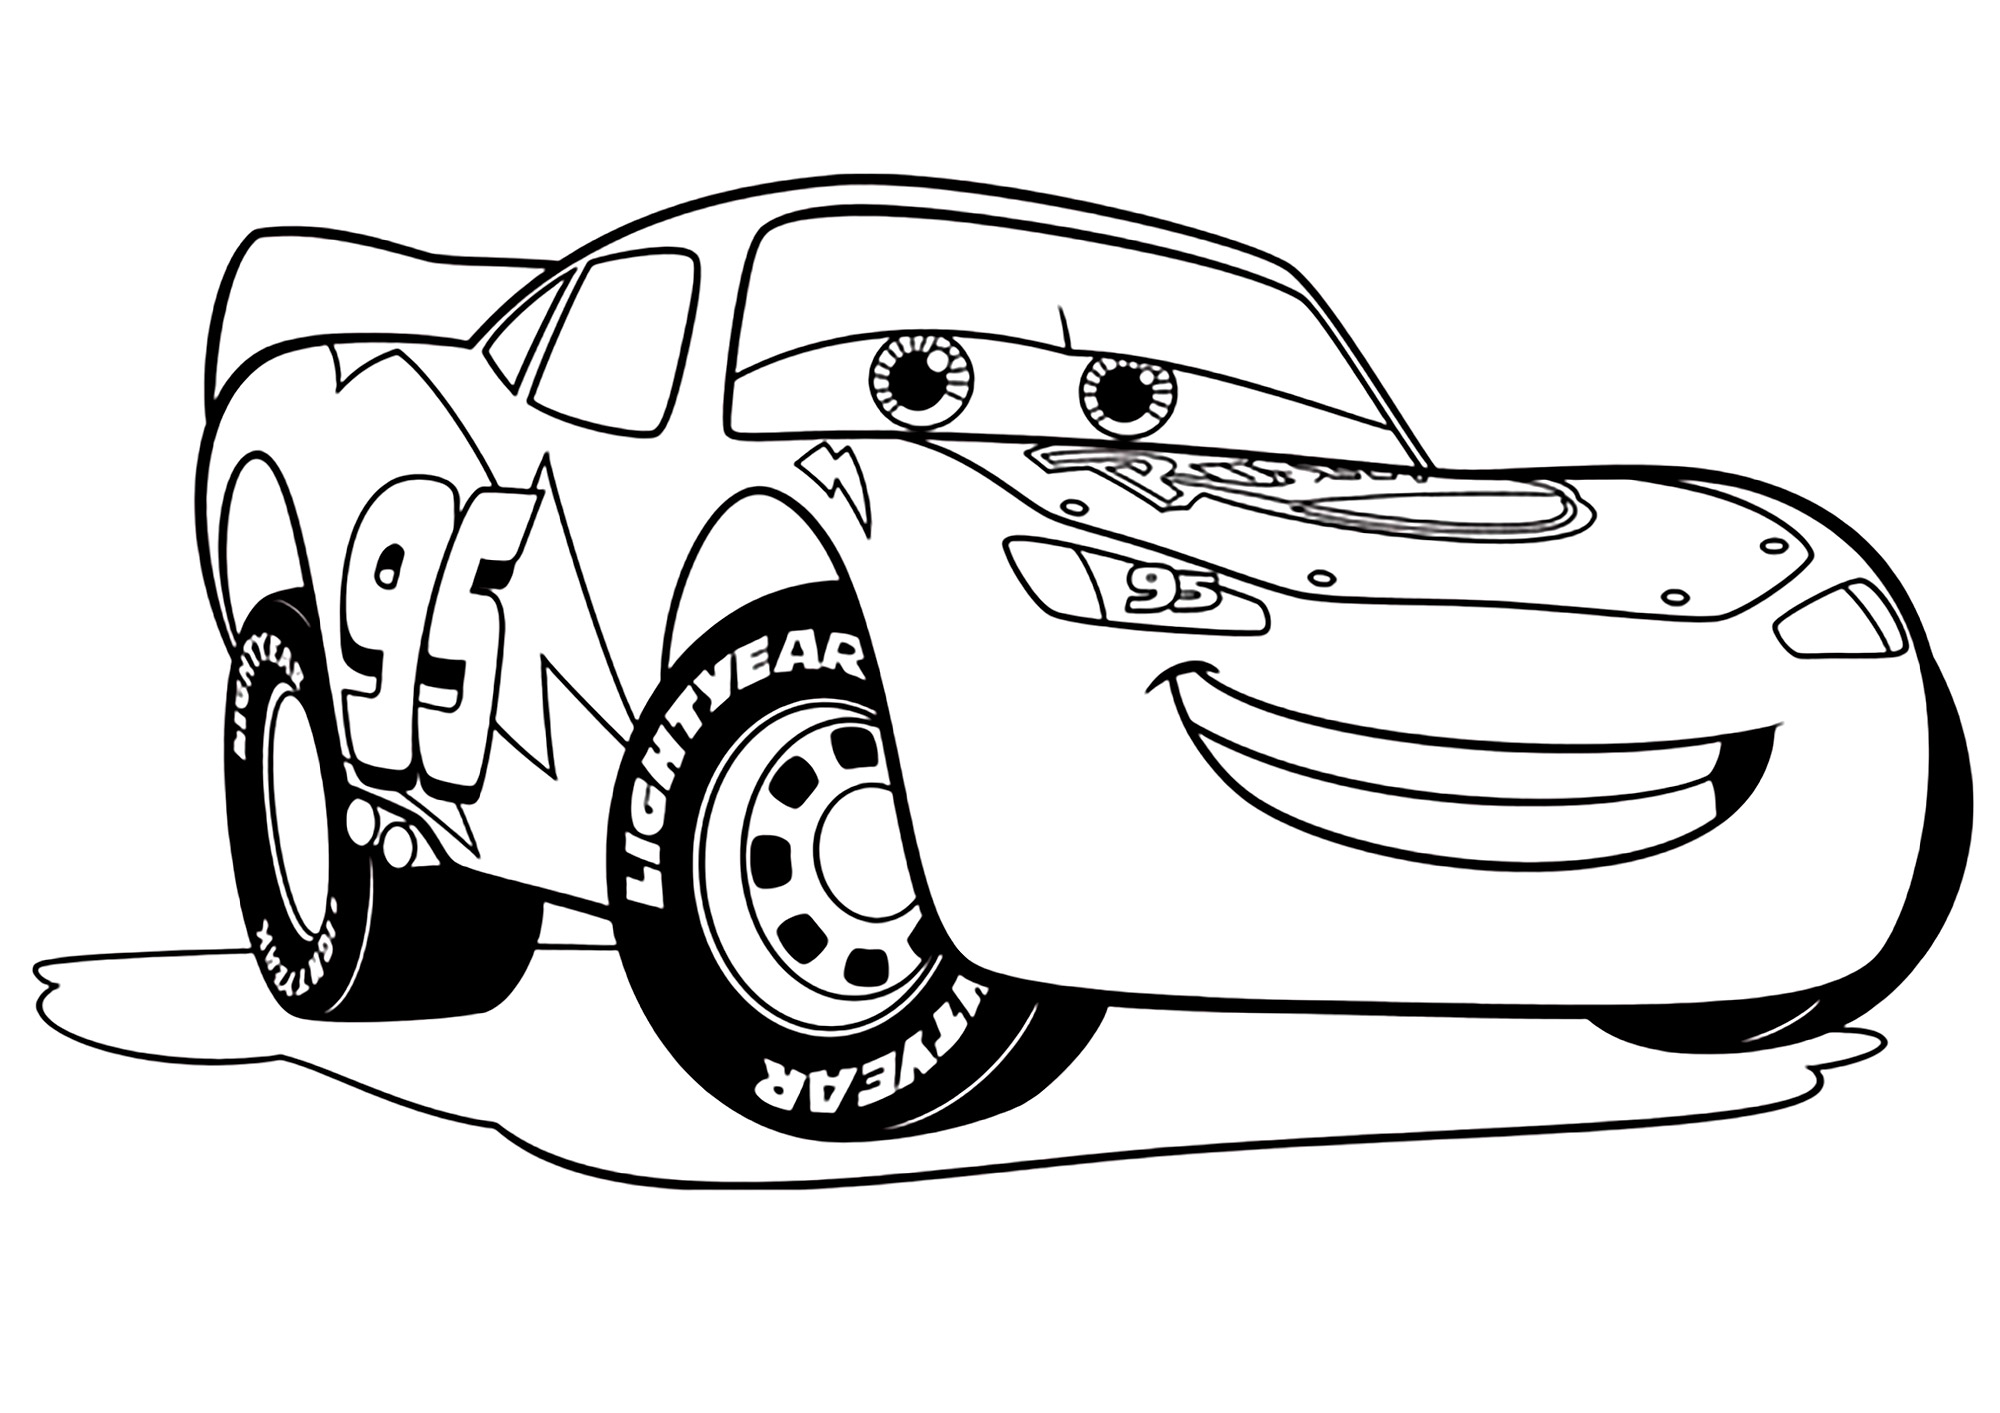 770  Coloring Pages Of Cars  Best Free